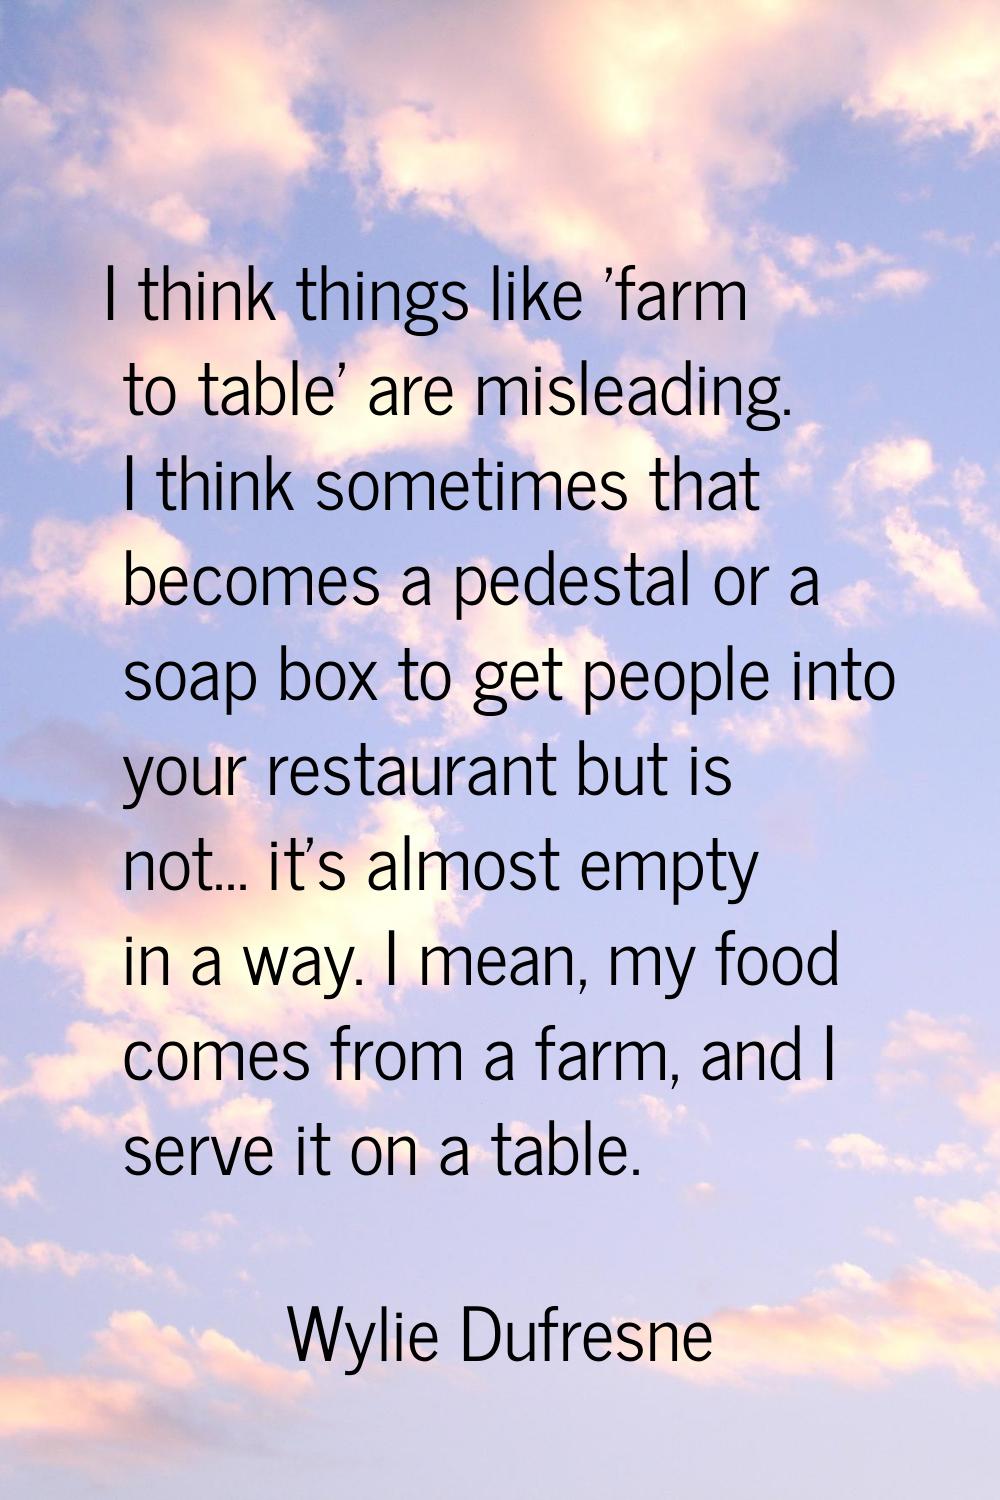 I think things like 'farm to table' are misleading. I think sometimes that becomes a pedestal or a 